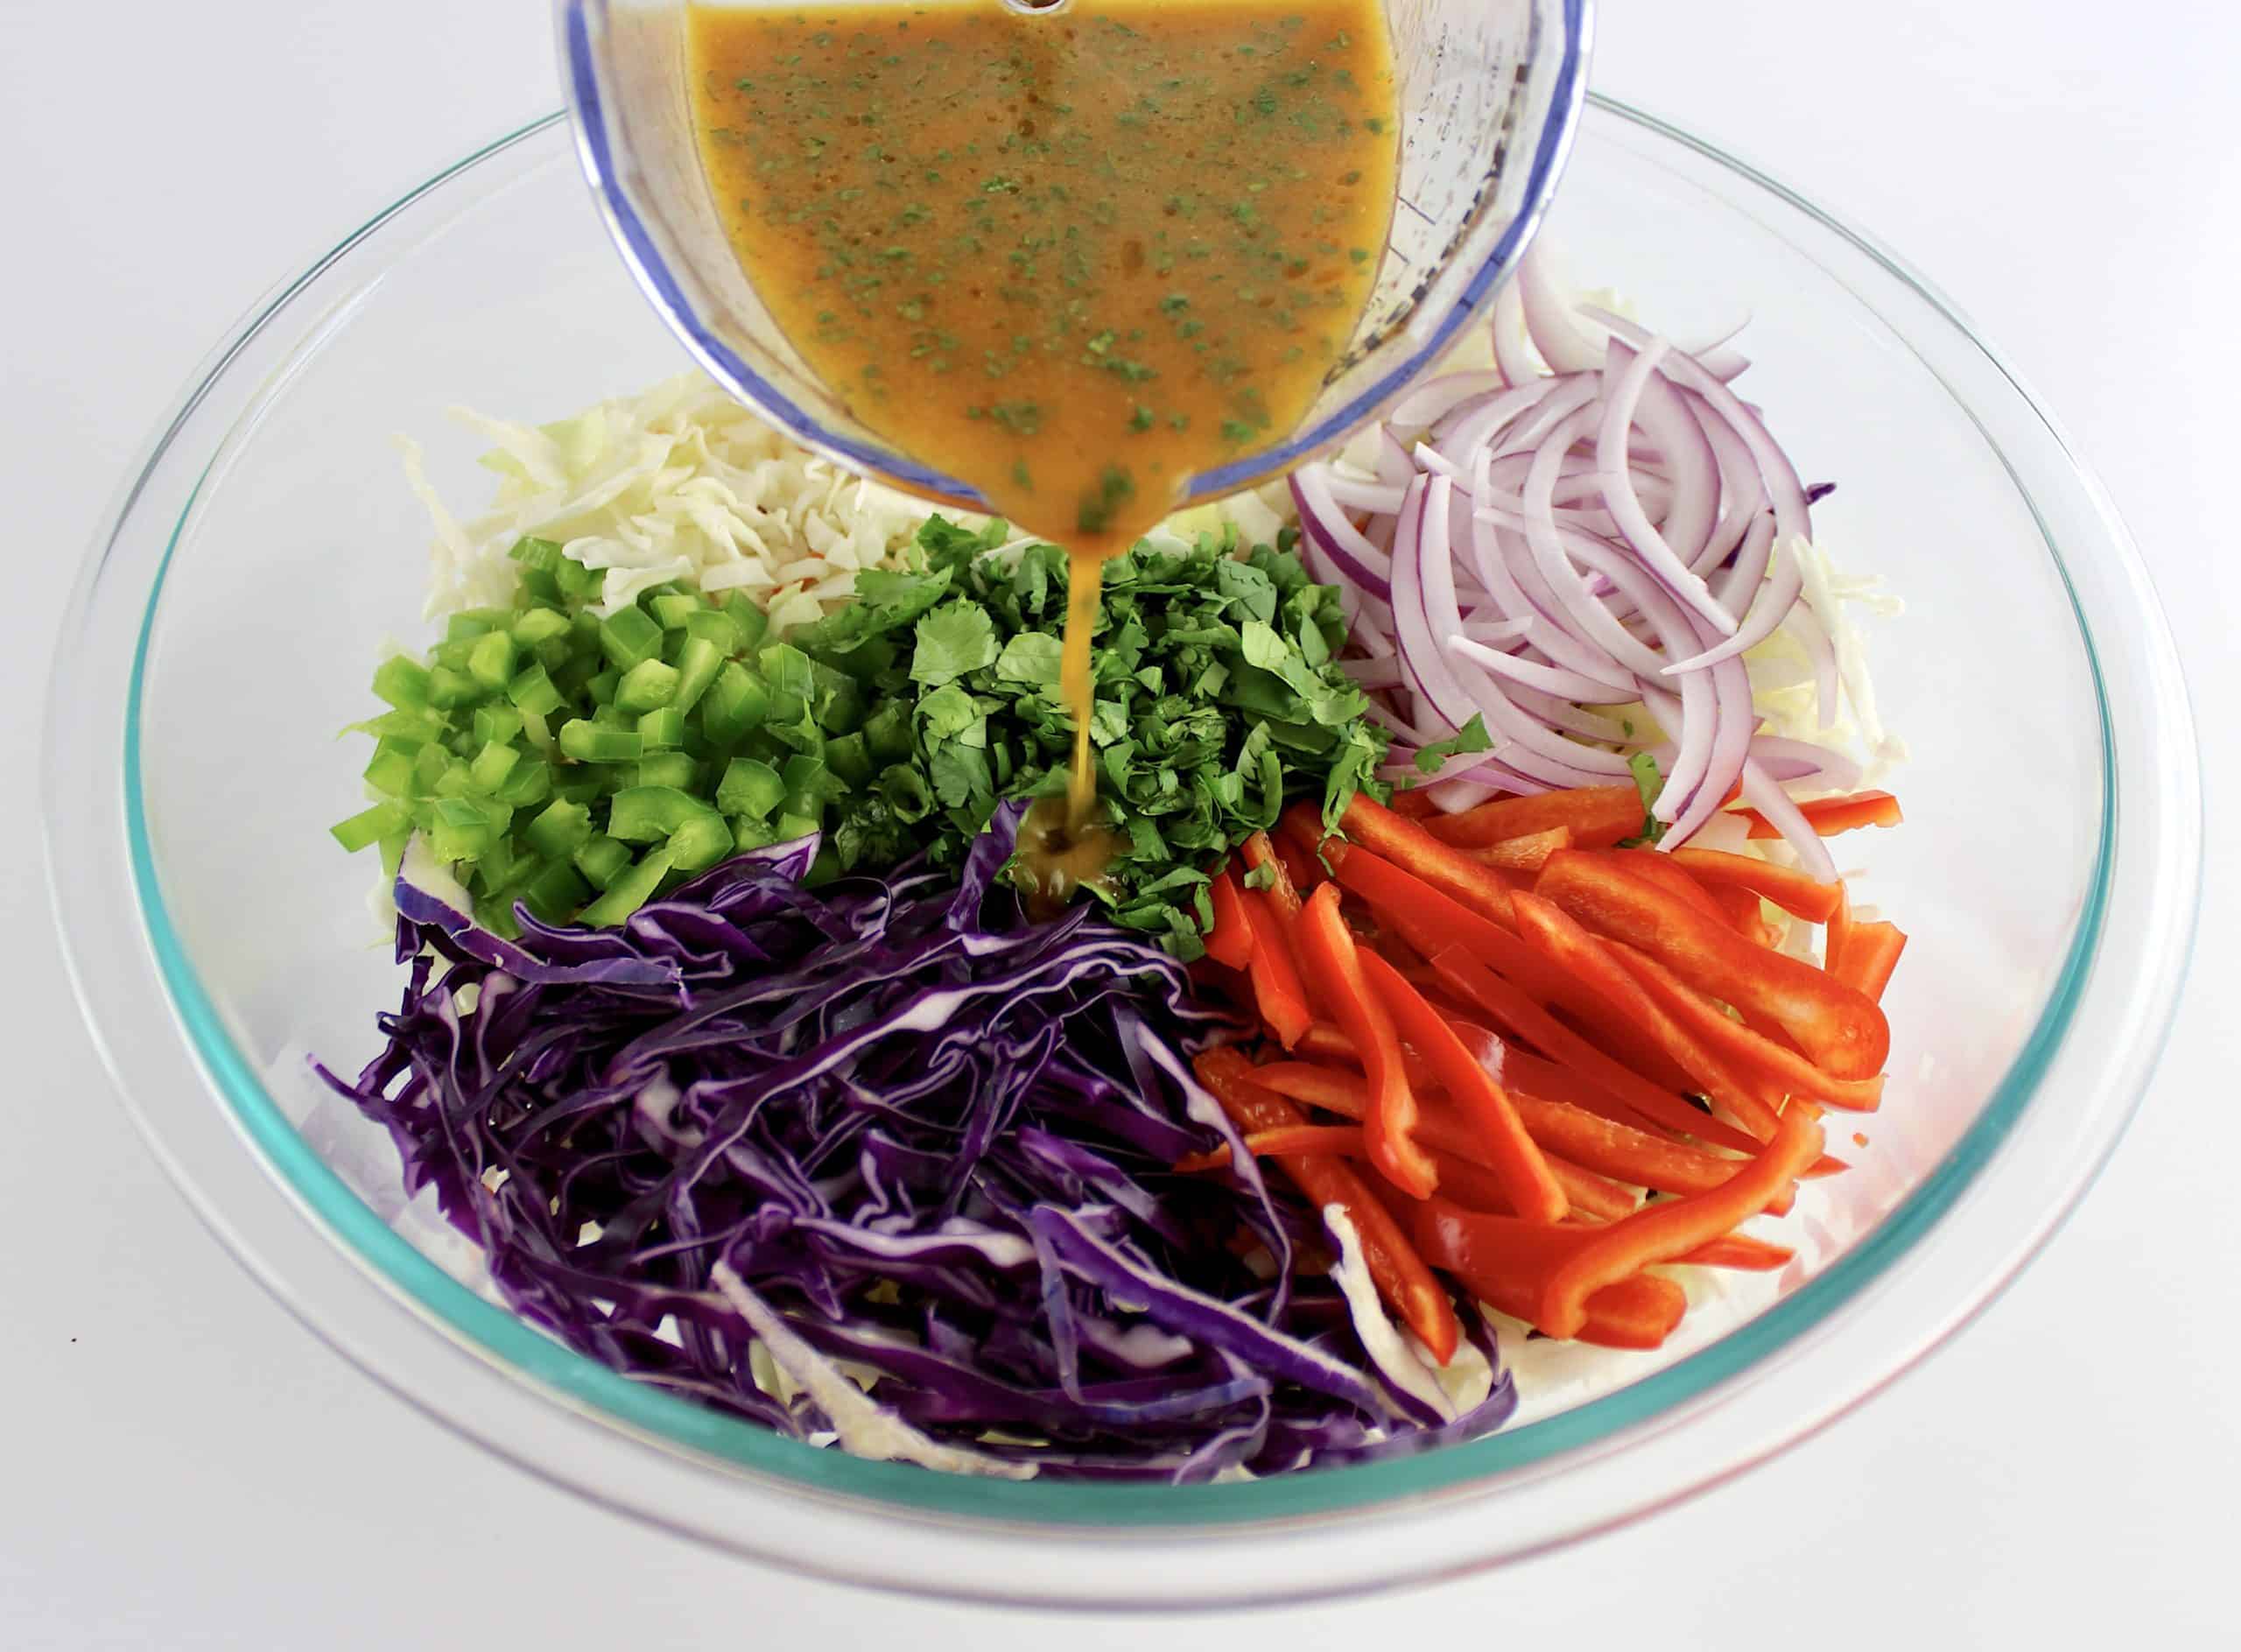 dressing being poured over Mexican Coleslaw ingredients unmixed in glass bowl